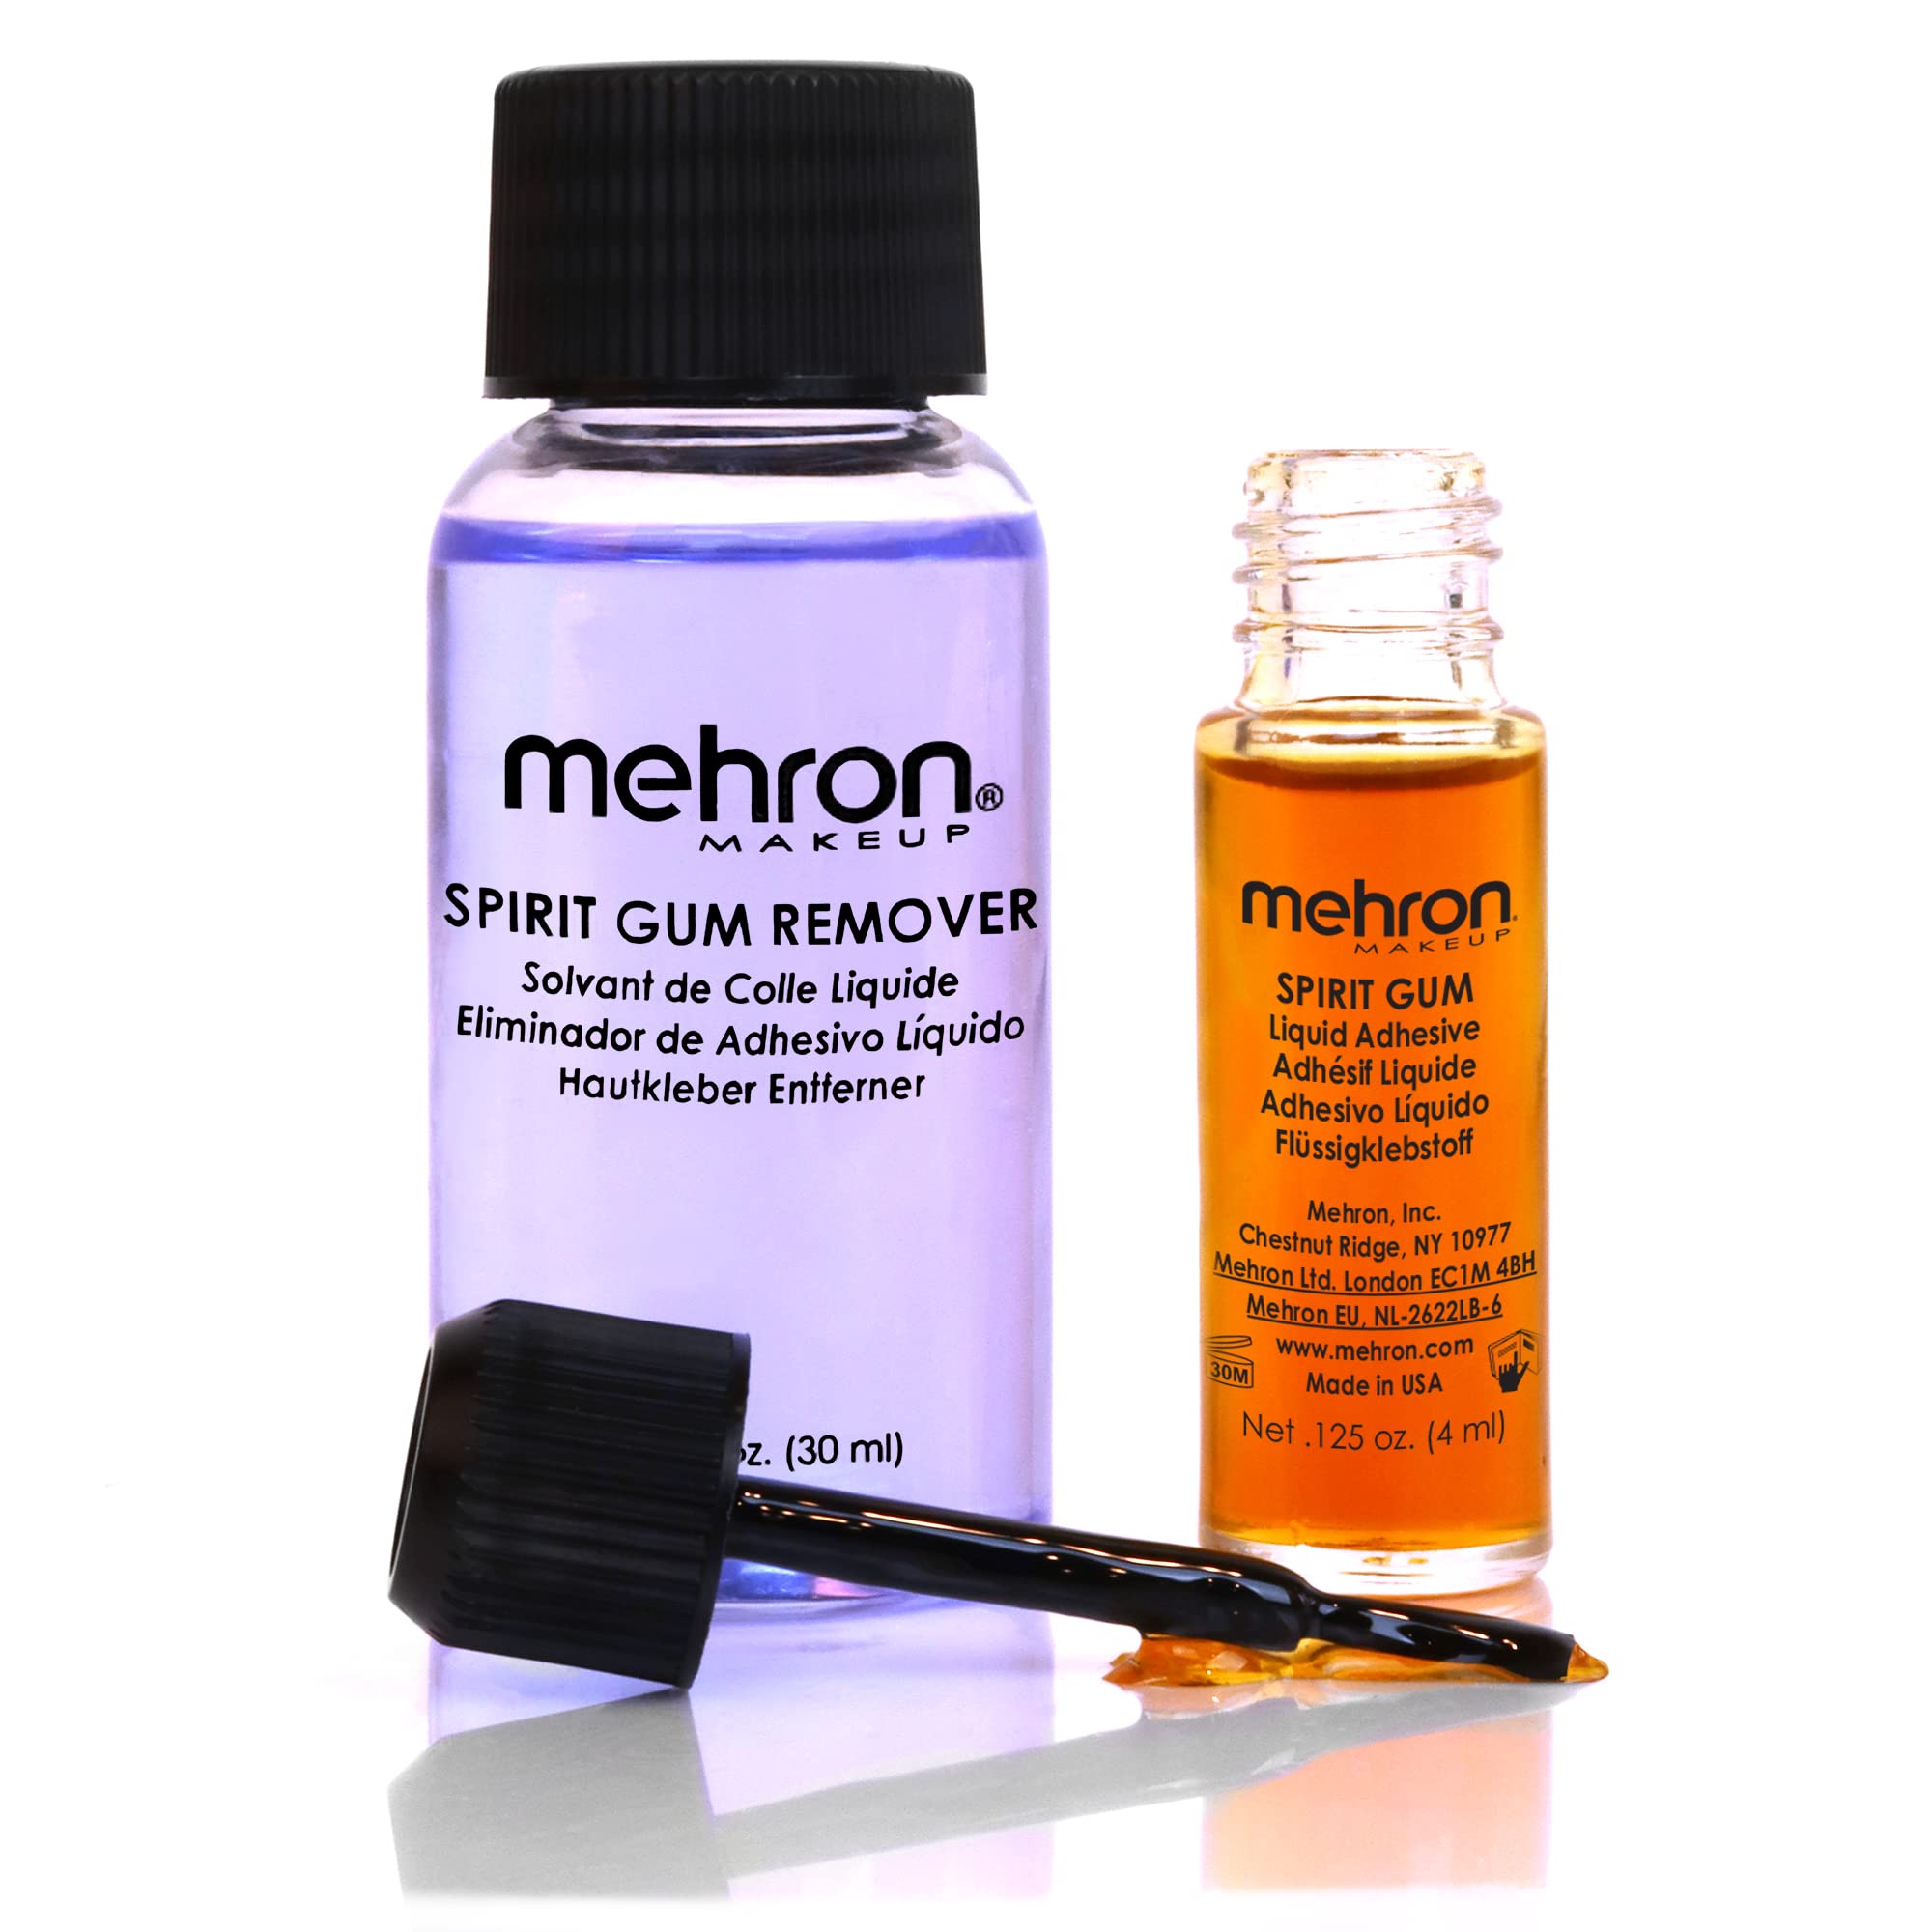 Mehron Makeup Spirit Gum & Remover Combo Kit | Spirit Gum Adhesive and Remover | Professional Cosmetic Glue for Face, Skin, & Body